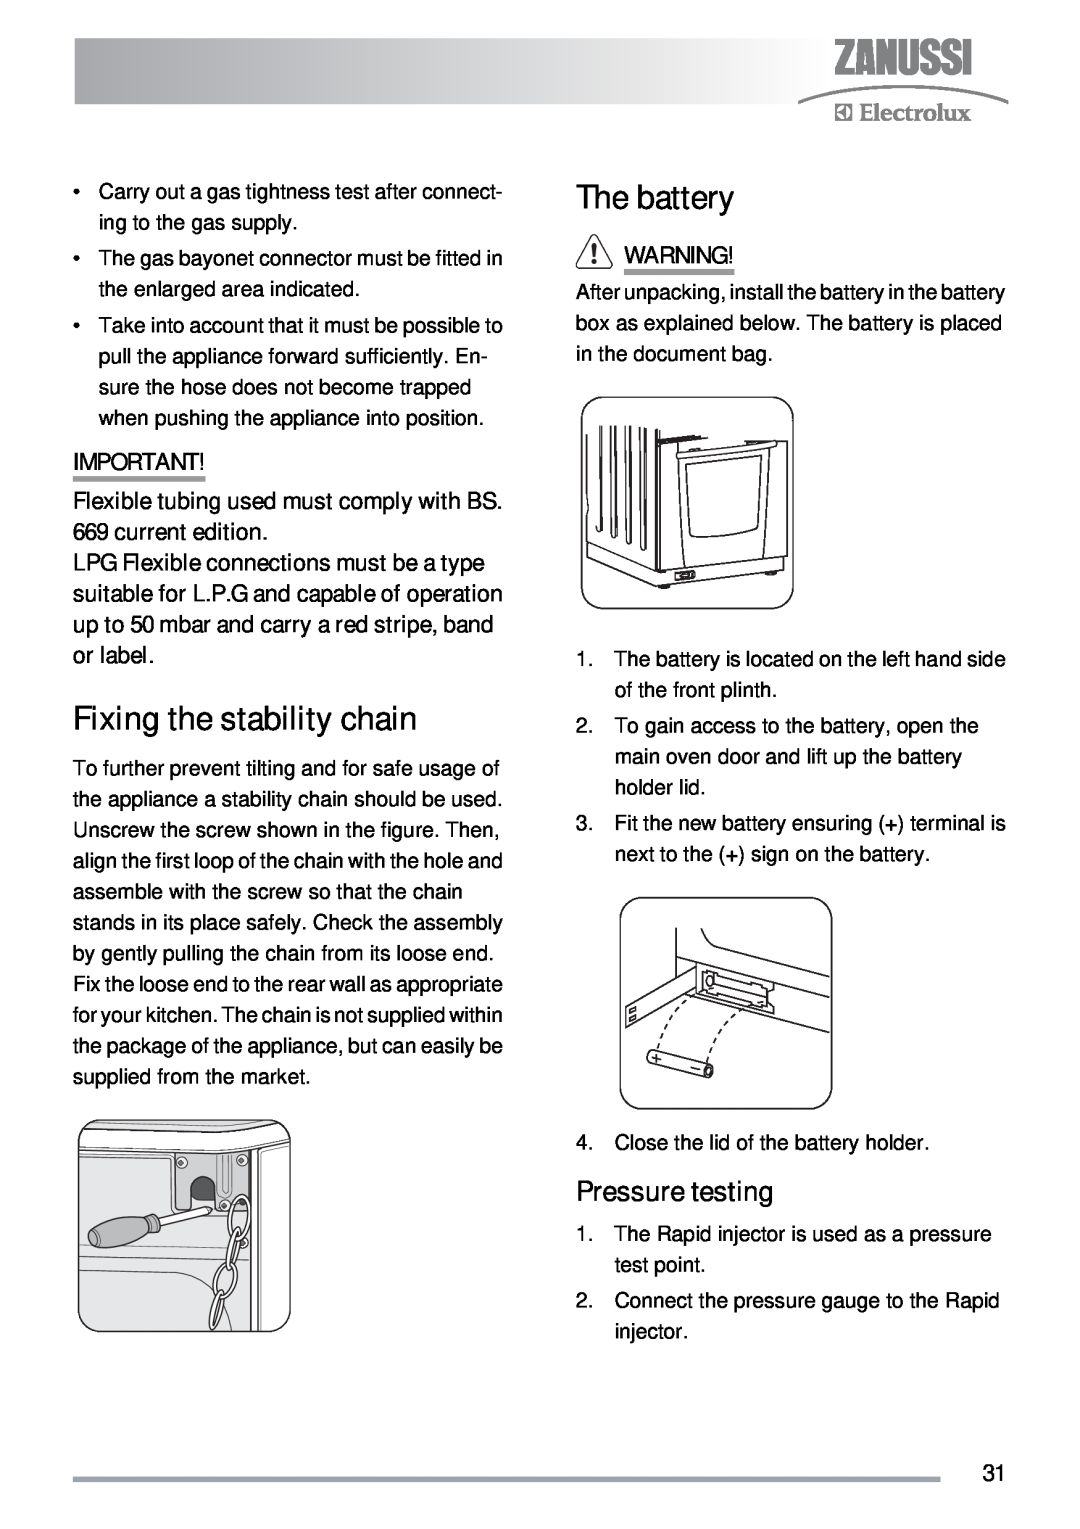 Zanussi ZKG5030 manual Fixing the stability chain, The battery, Pressure testing 